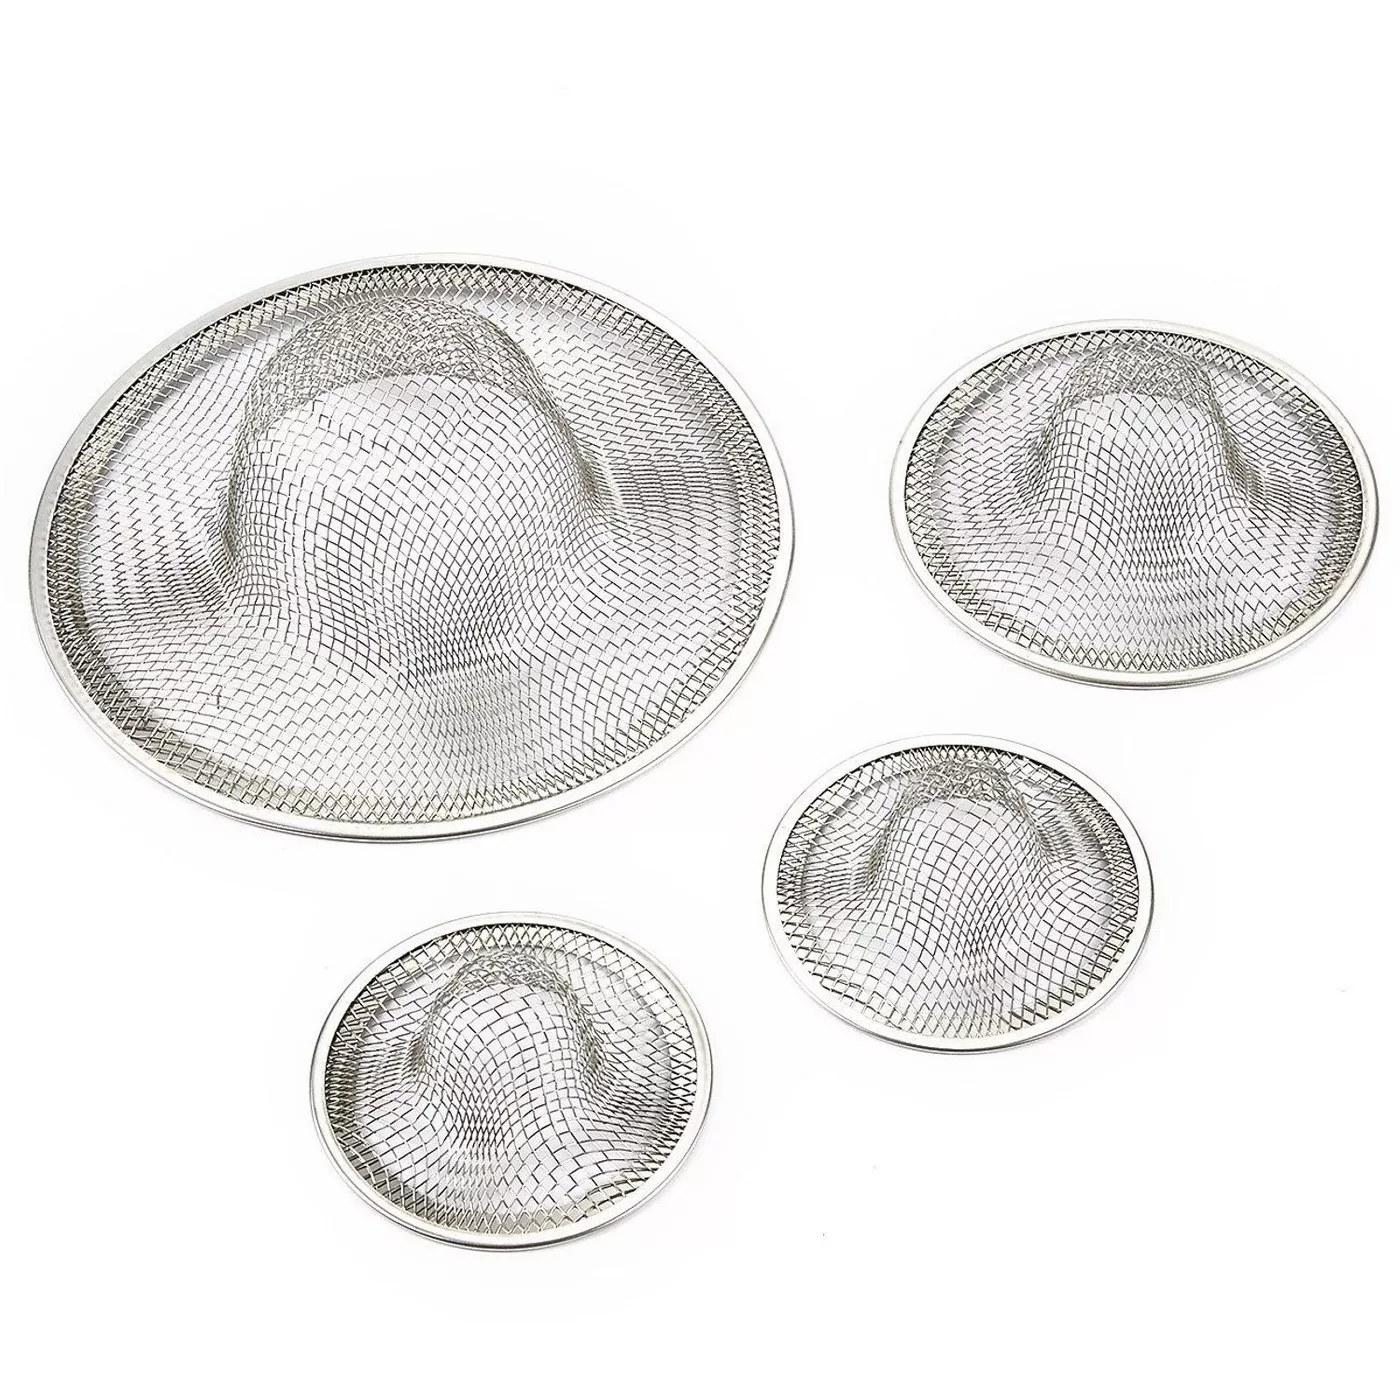 The mesh strainers